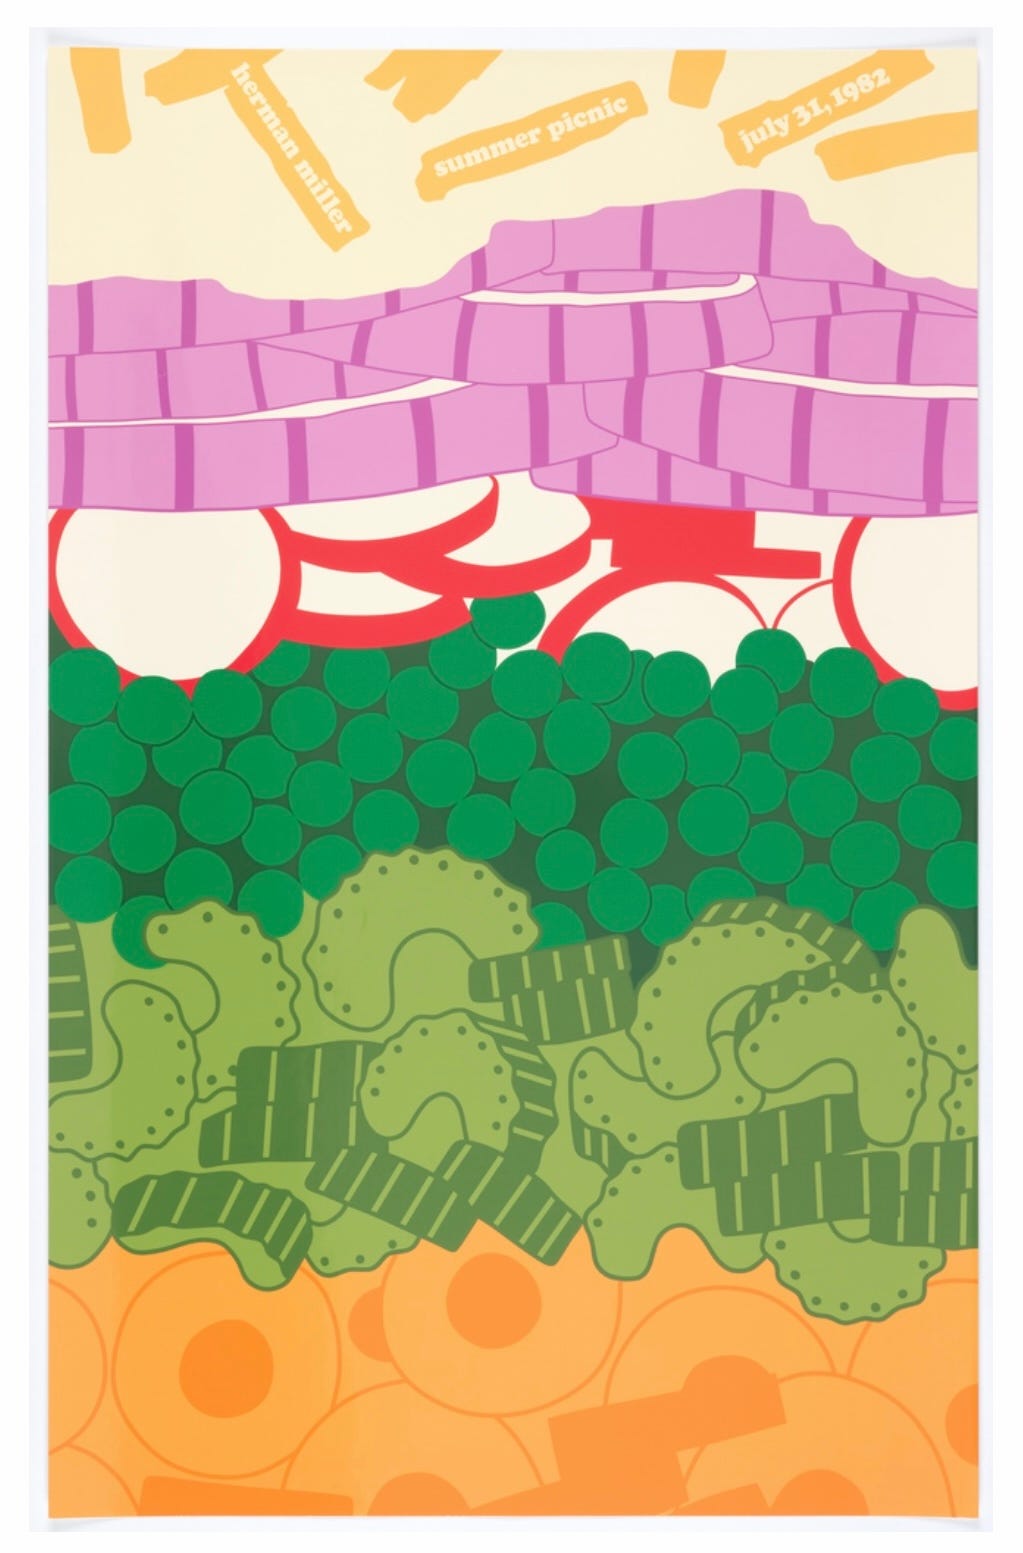 The Herman Miller Summer Picnic Posters, Part One